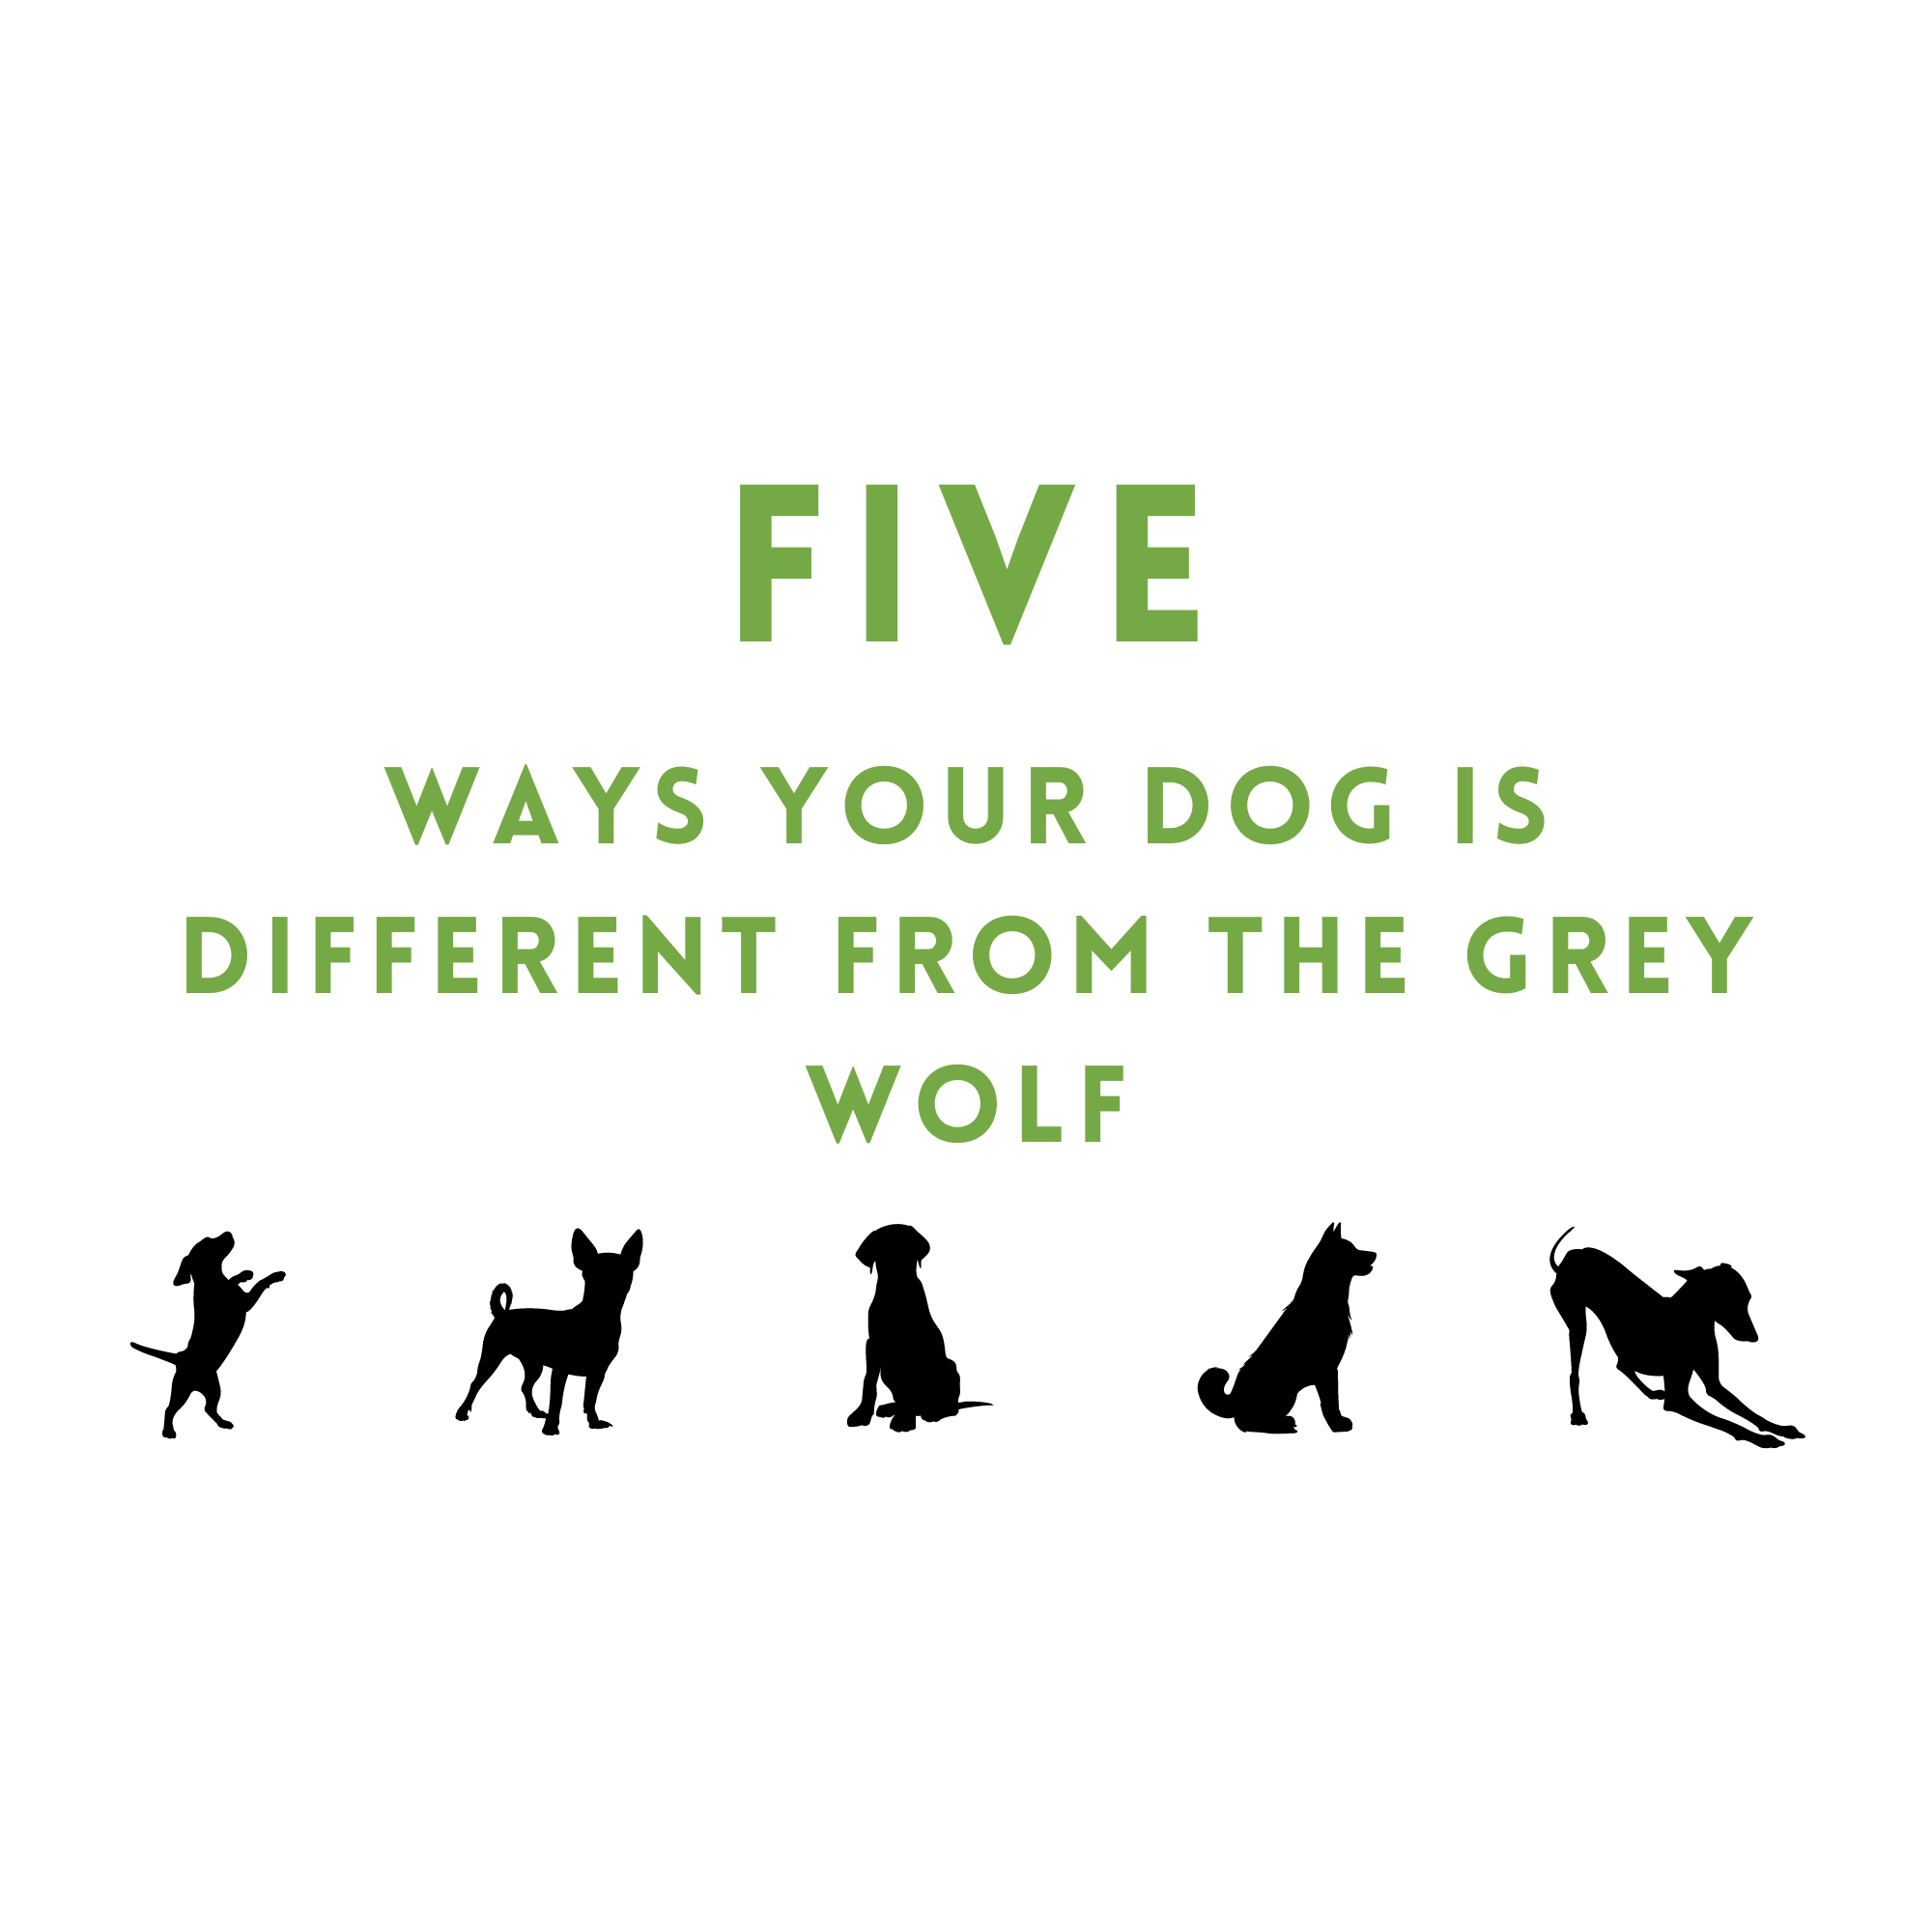 Five Ways Your Dog is Different From the Grey Wolf